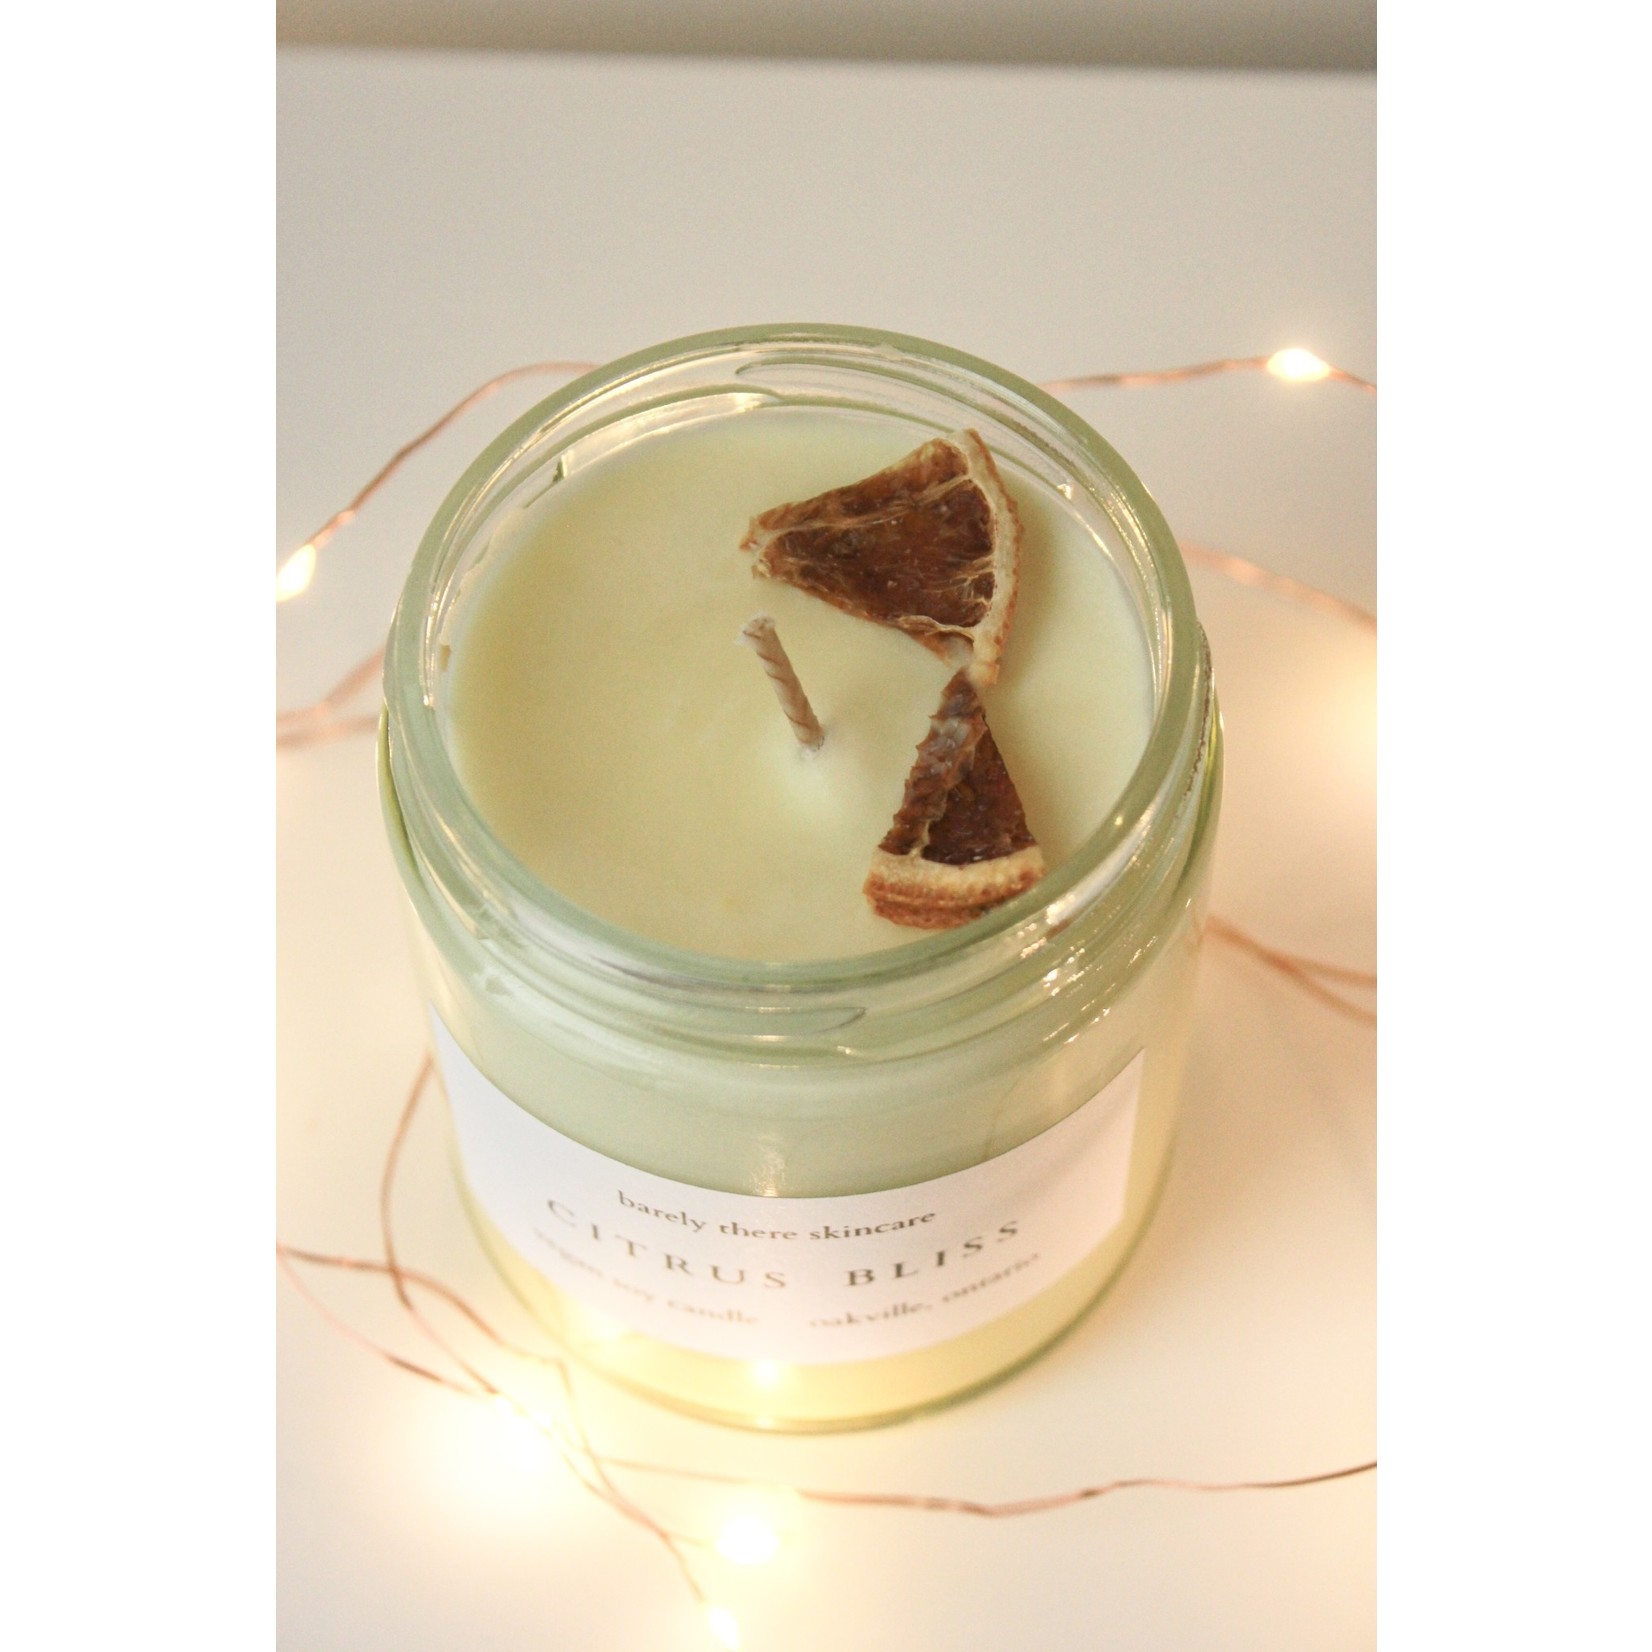 BARELY THERE SKINCARE BARELY THERE CITRUS BLISS CANDLE